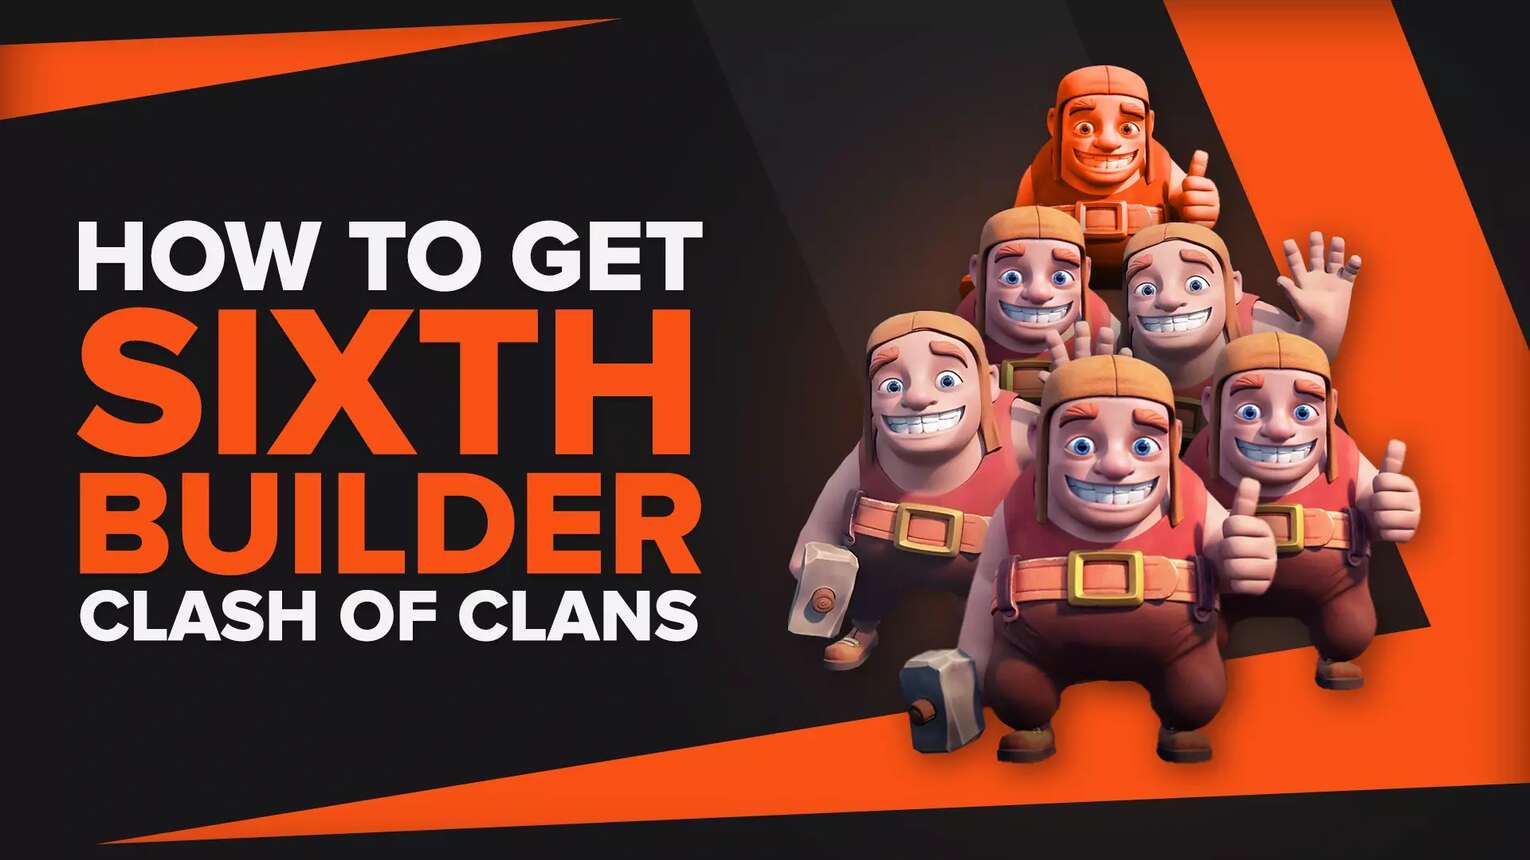 How To Get The 6th Builder In Clash Of Clans (Updated)